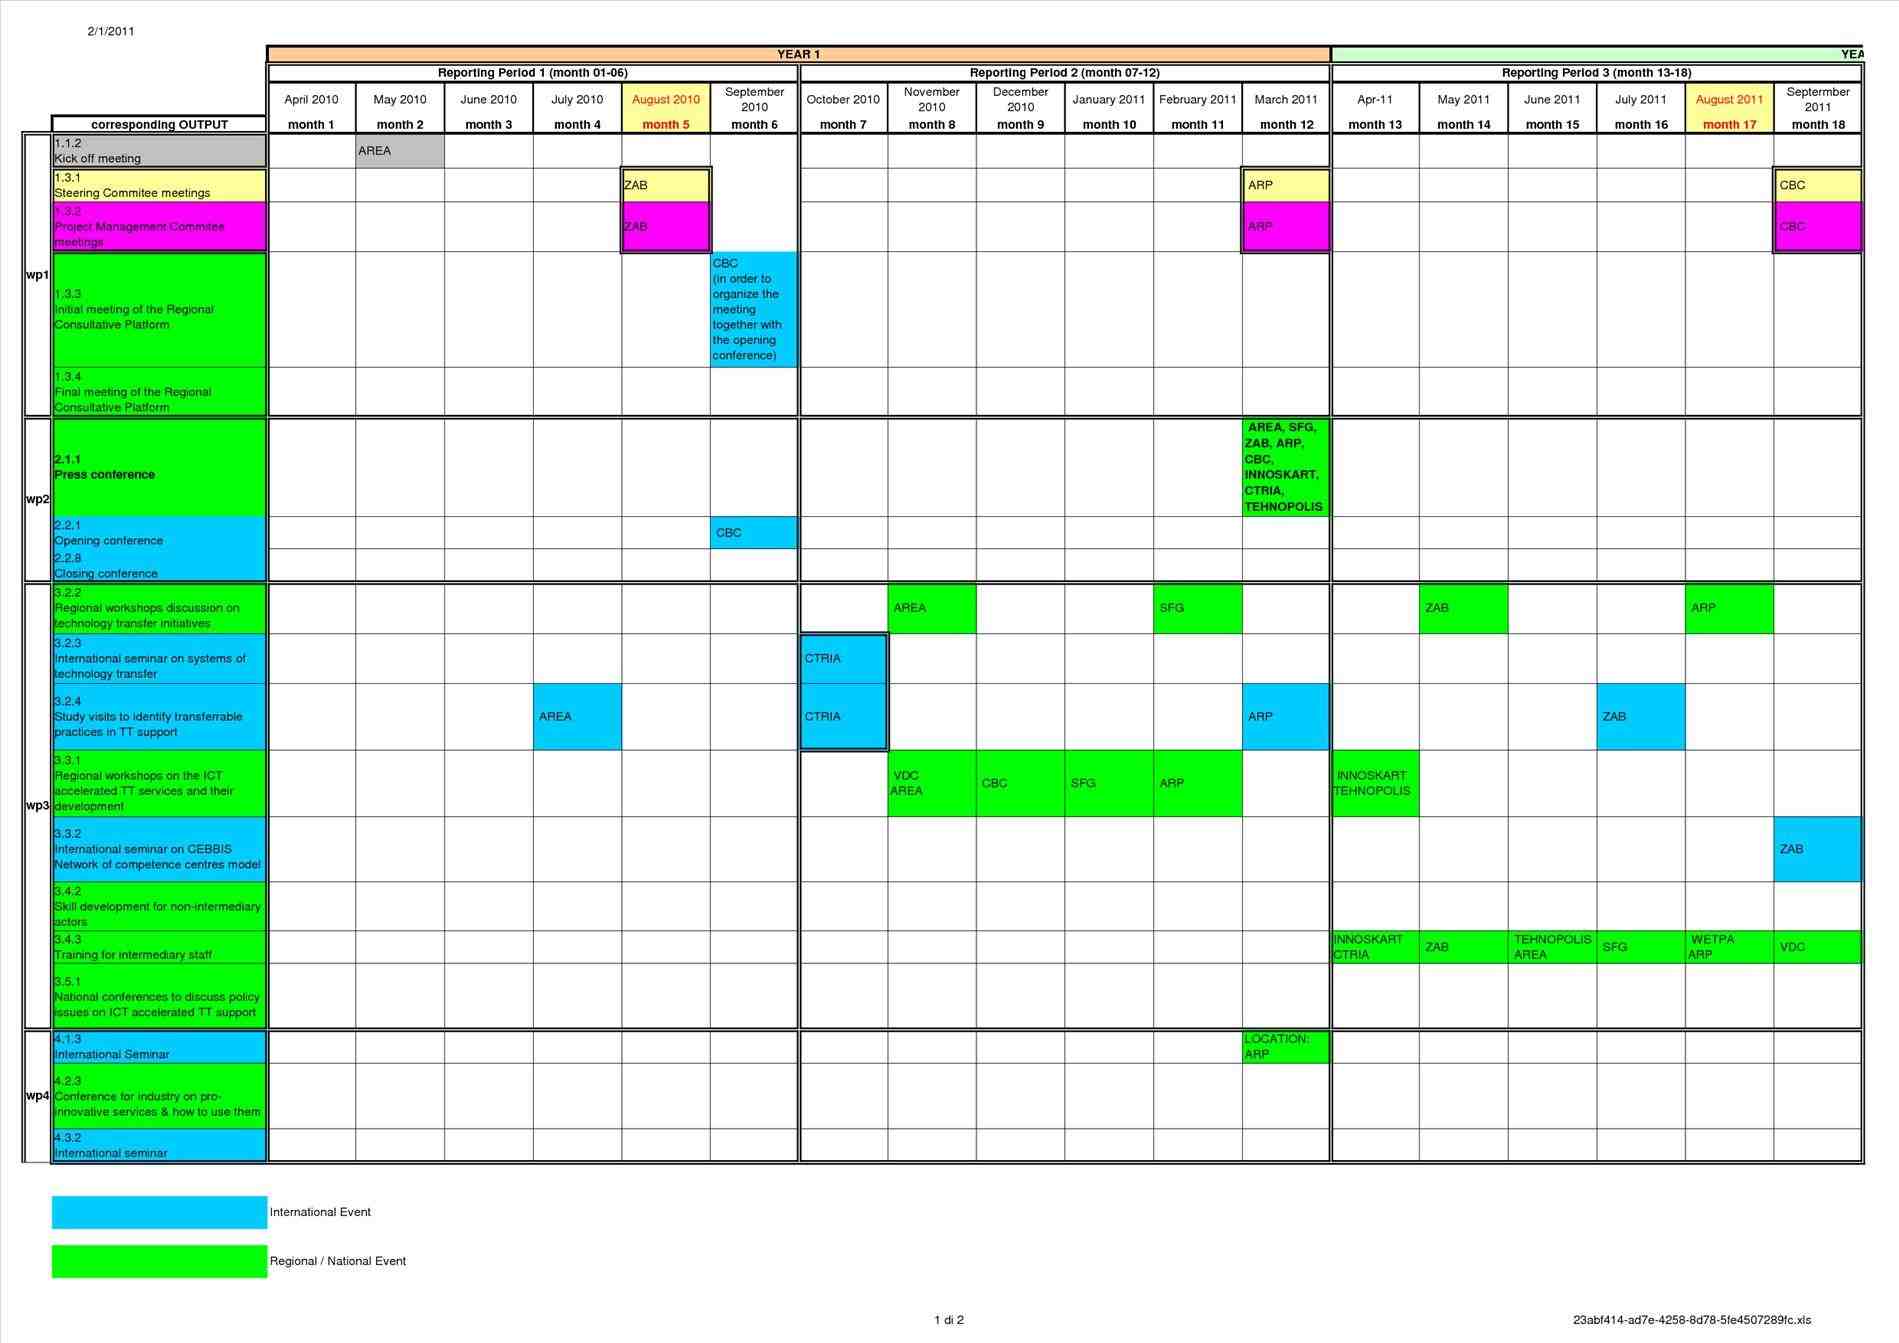 Excel 2010 Project Plan Template schedule template excel itinerary samplerhitinerarytemplateinfo free gantt charting and planning ganttdiva is a rhganttdivacom free Excel